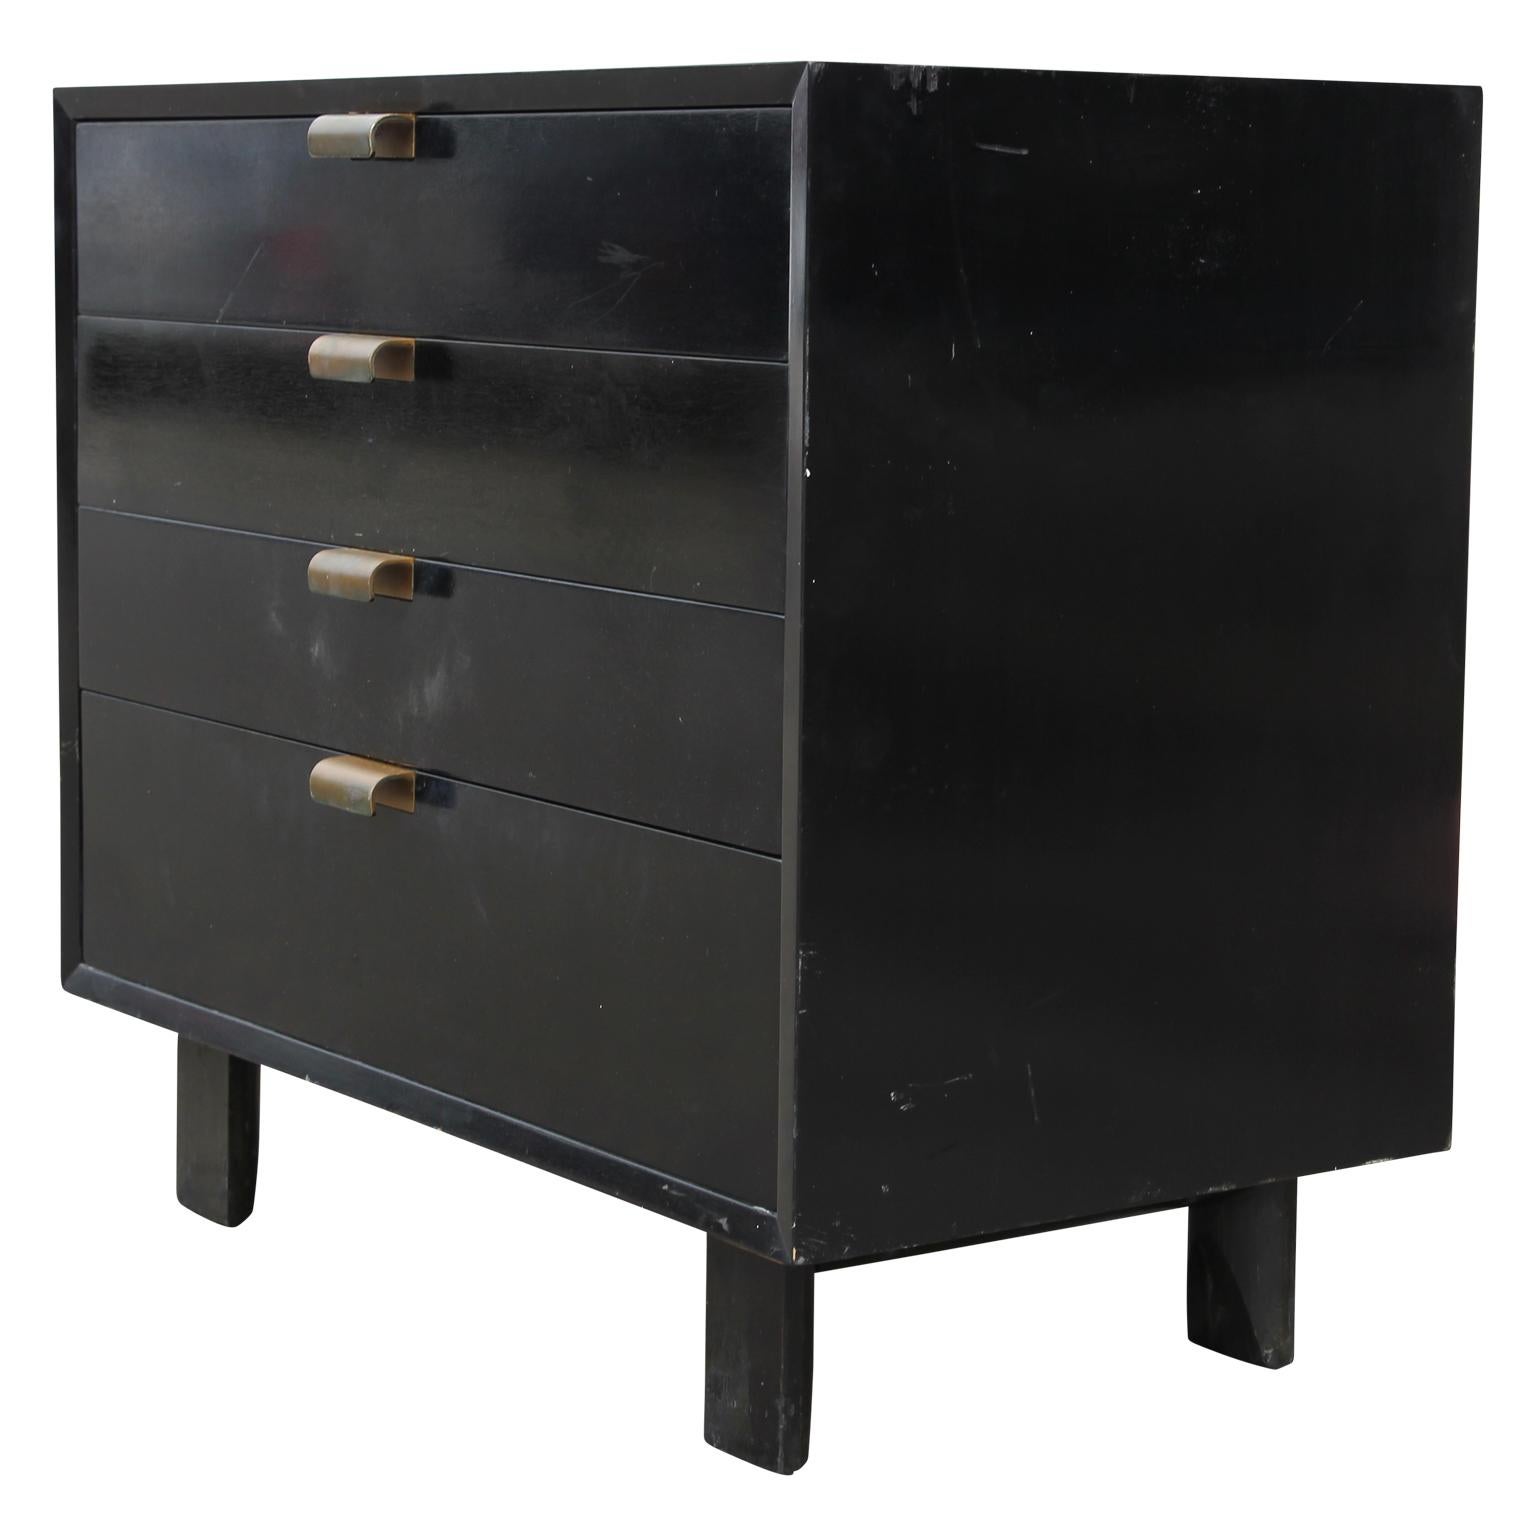 20th Century Pair of Herman Miller Black Finished Mid-Century Modern Chests by George Nelson